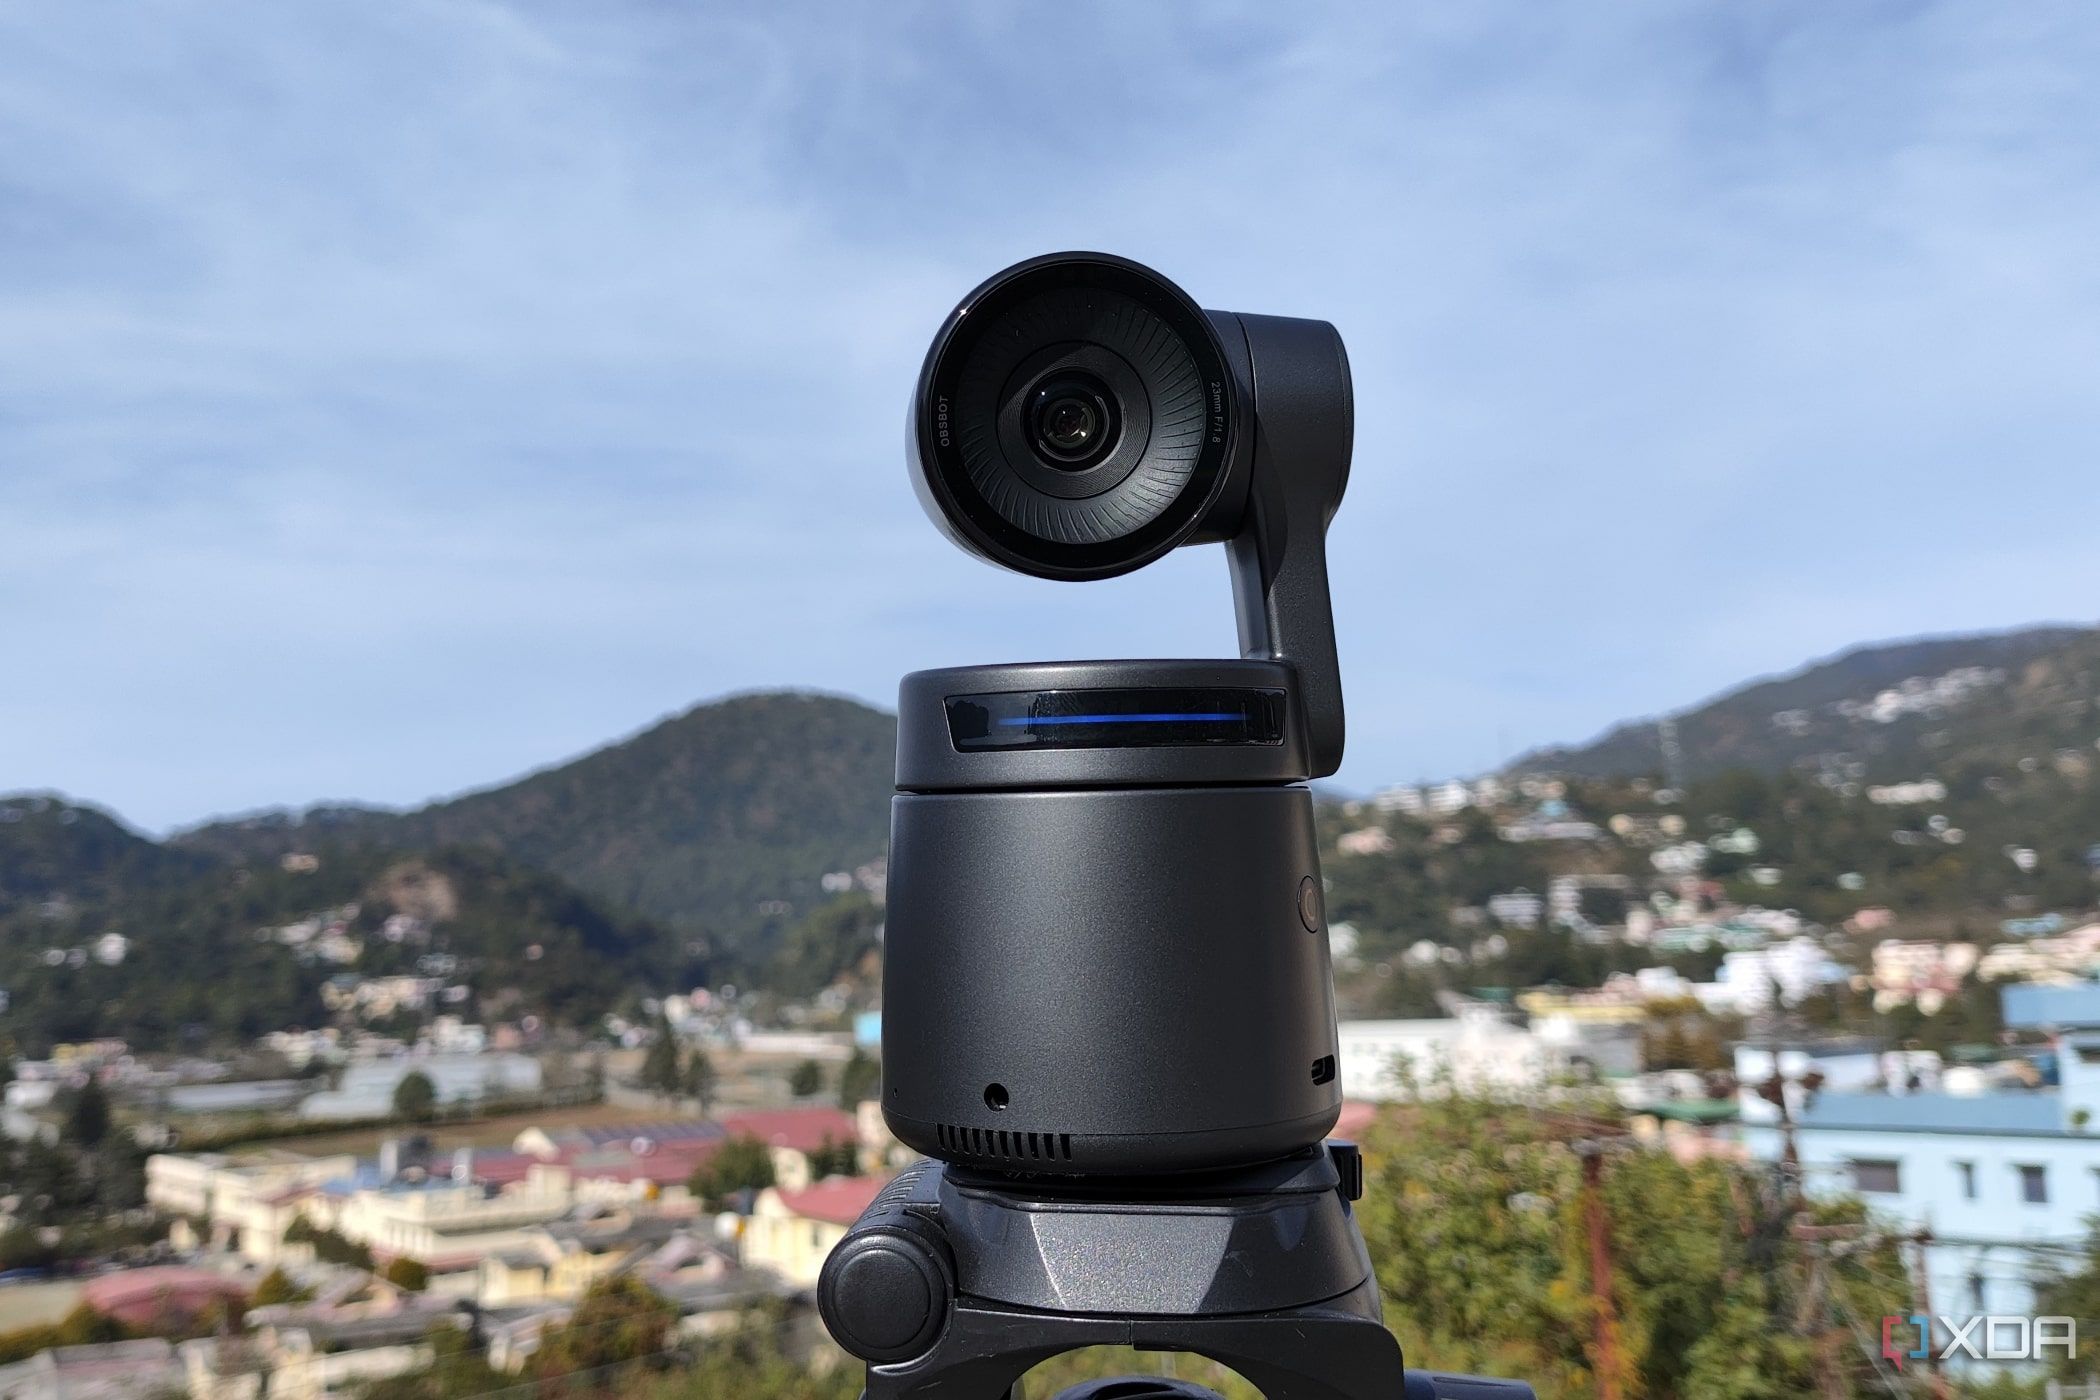 Obsbot Tail Air review: The most premium 4K webcam with AI features on the market